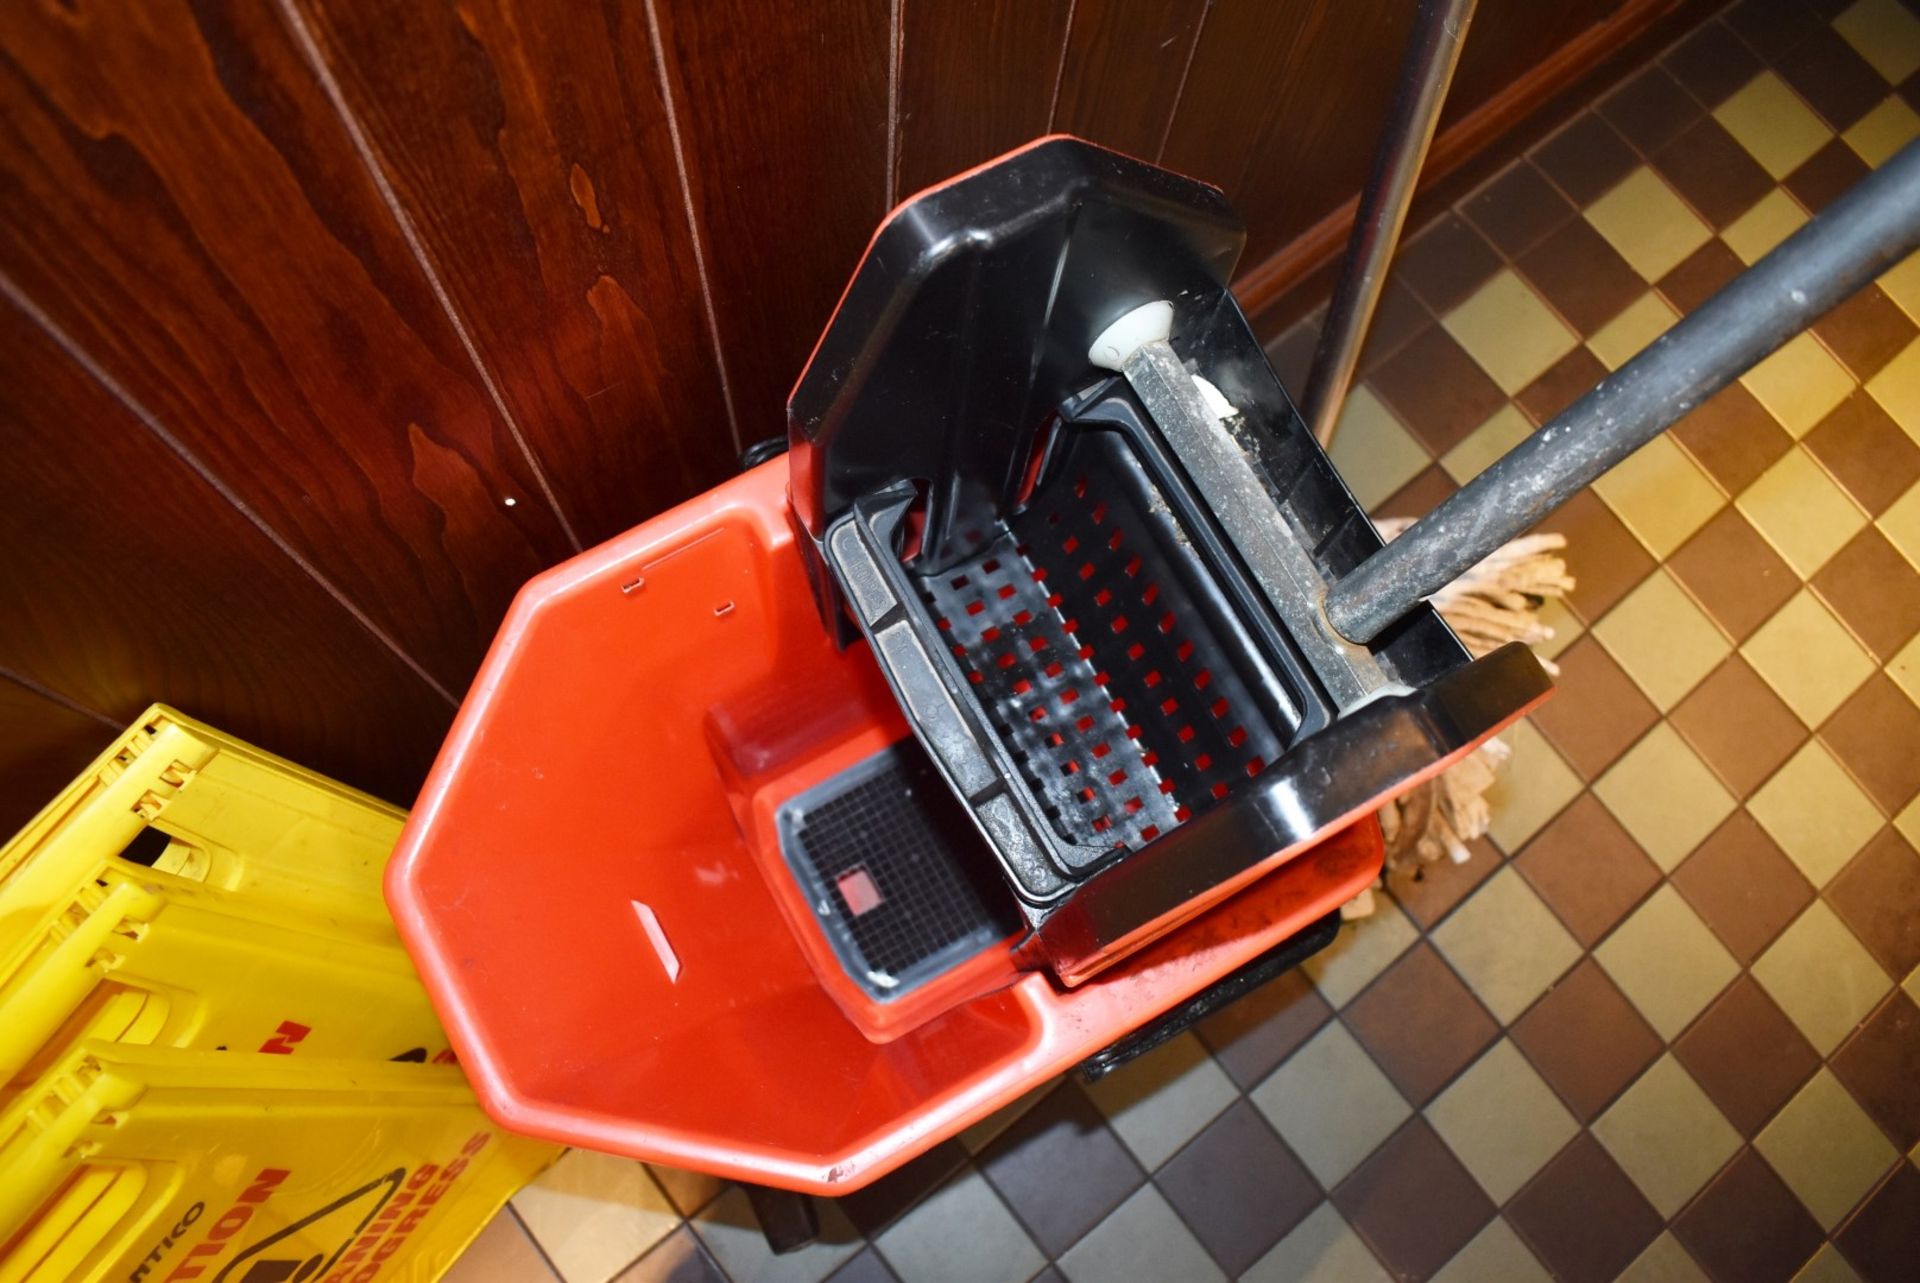 1 x SIR Commercial Mop Bucket With Mop and Three Wet Floor Signs - Image 4 of 4